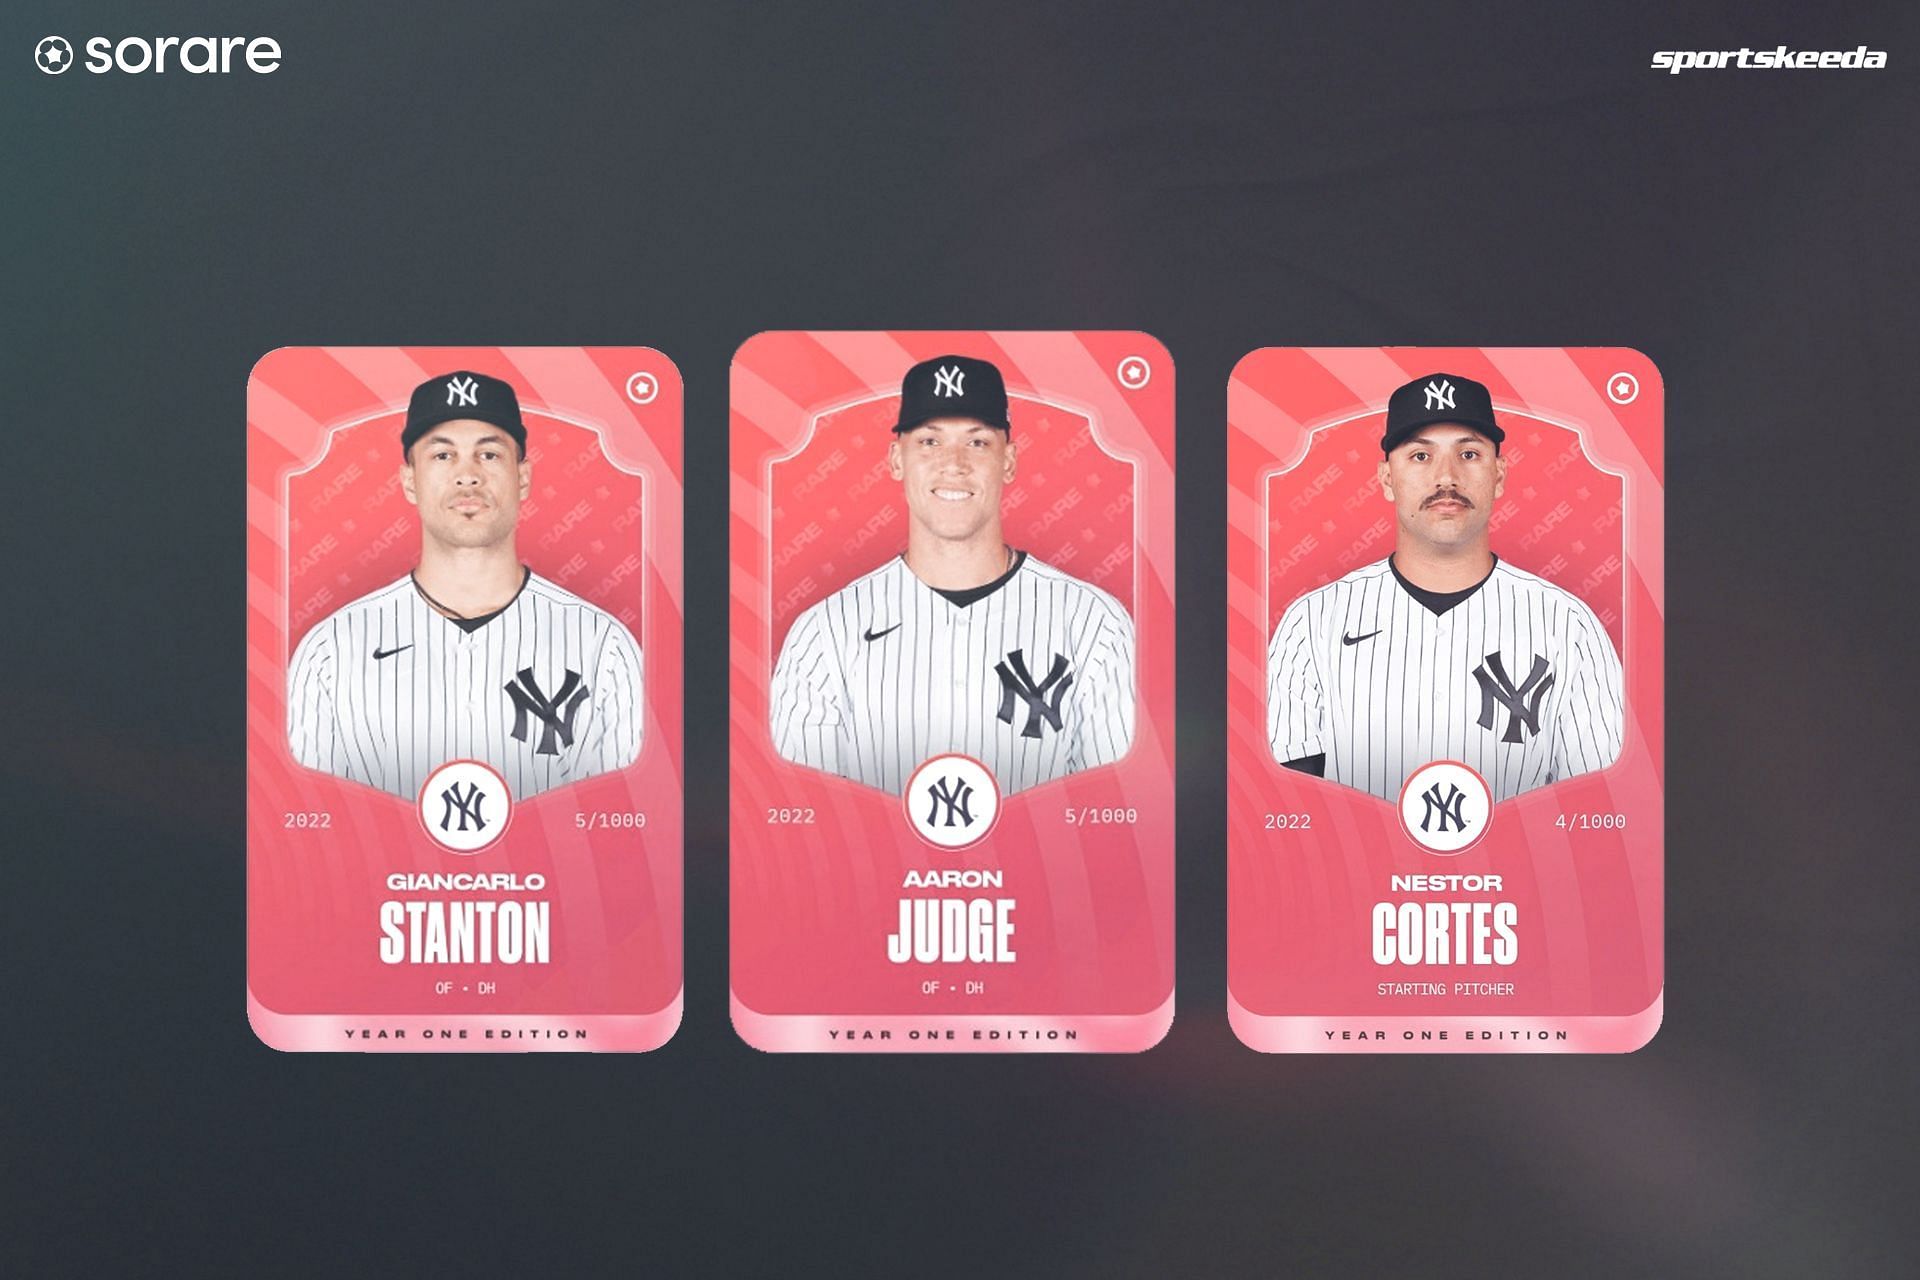 Giancarlo Stanton (left), Aaron Judge (middle) and Nestor Cortes (right) are all featured in MLB Sorare.